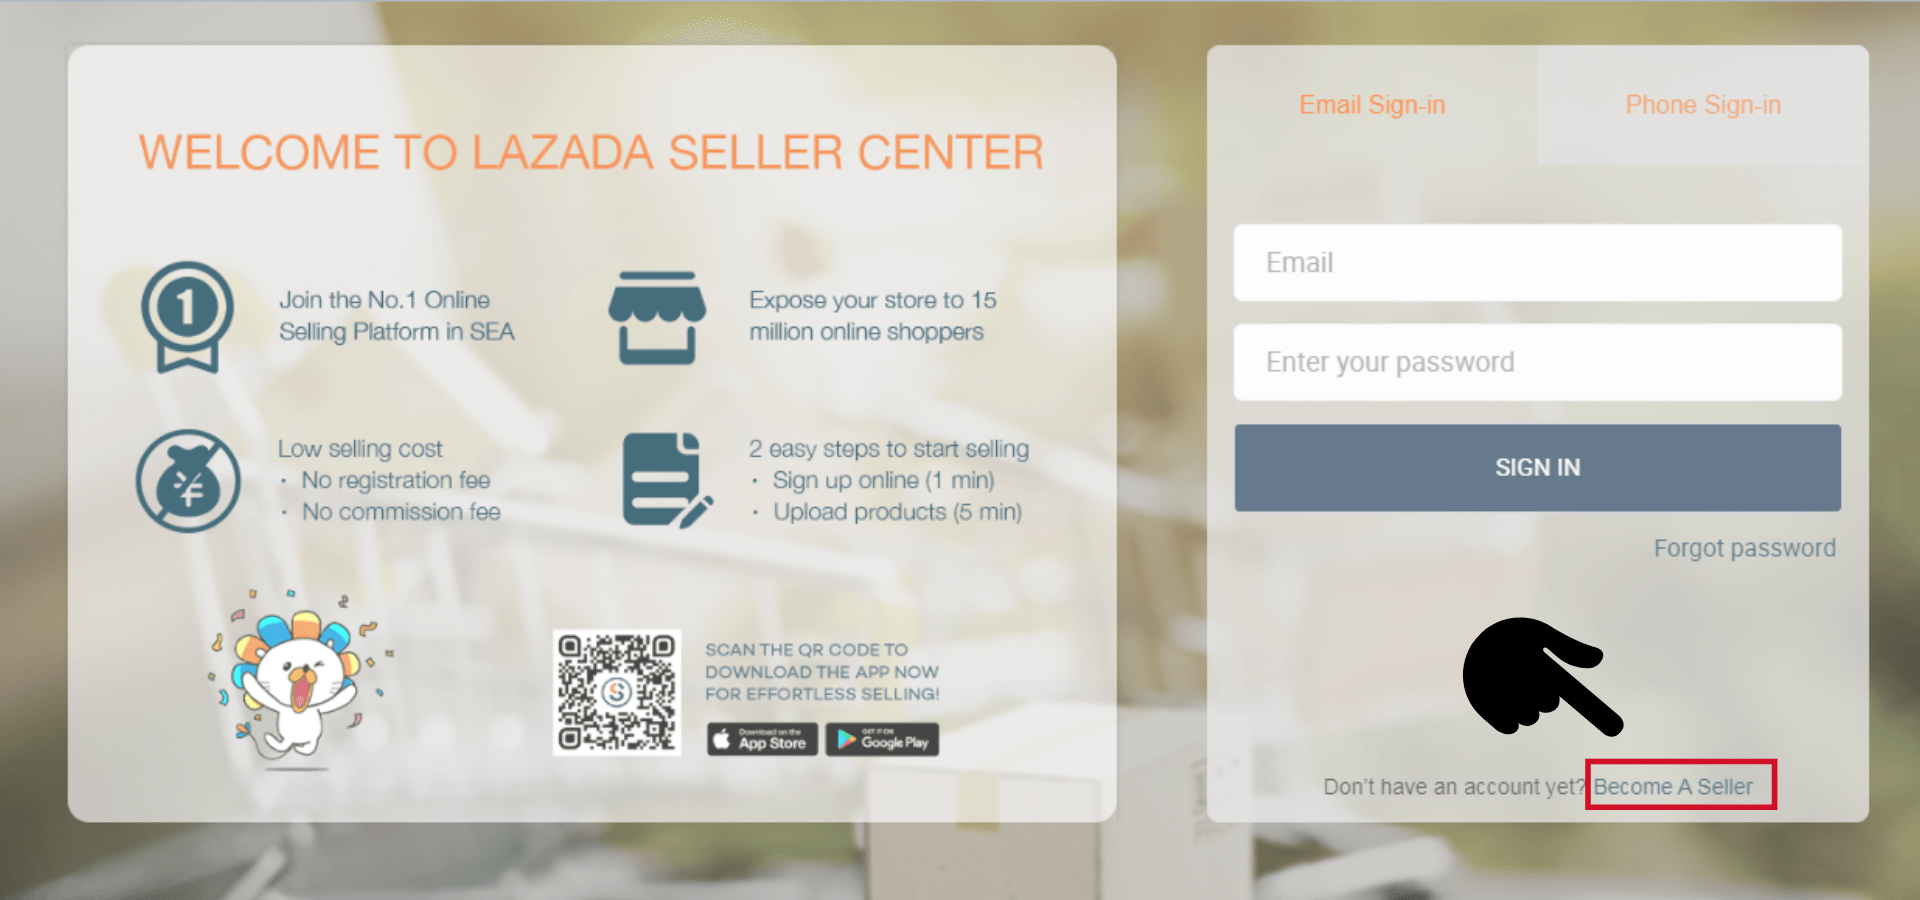 Our Guide to Selling on Lazada as an International Seller - What to Know